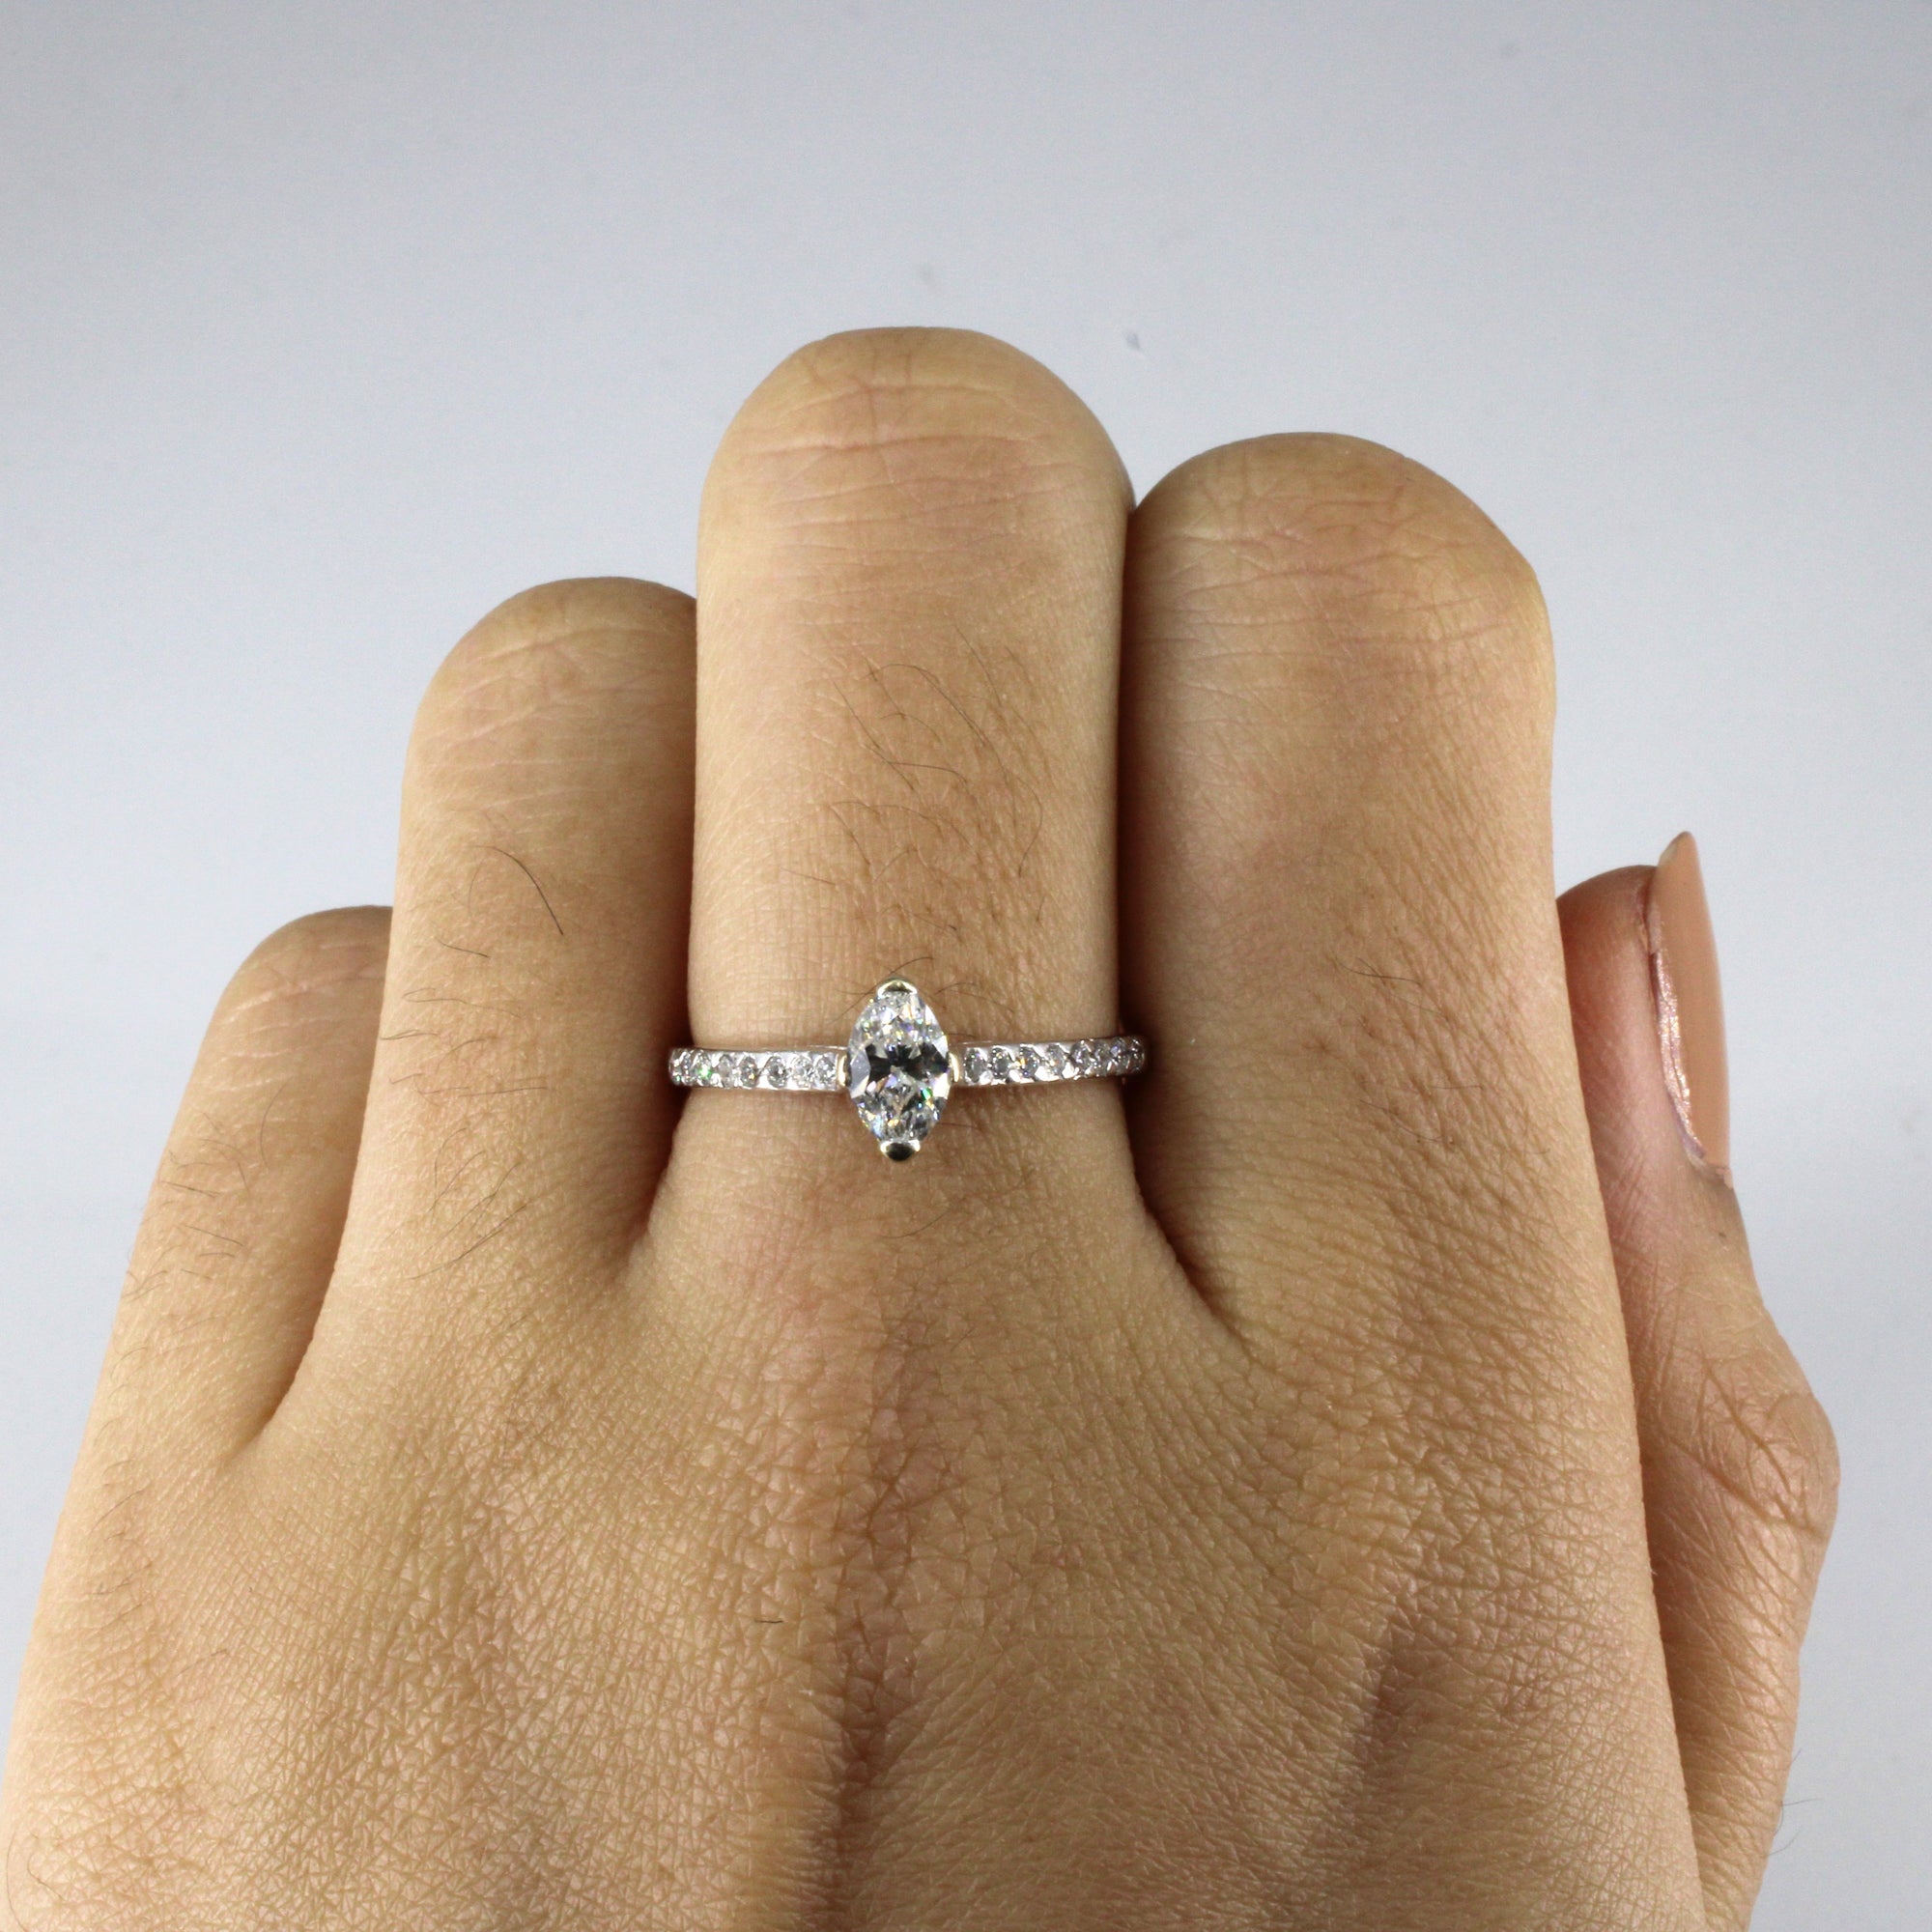 Marquise Diamond with Accents Engagement Ring | 0.72ctw | SZ 7.5 |